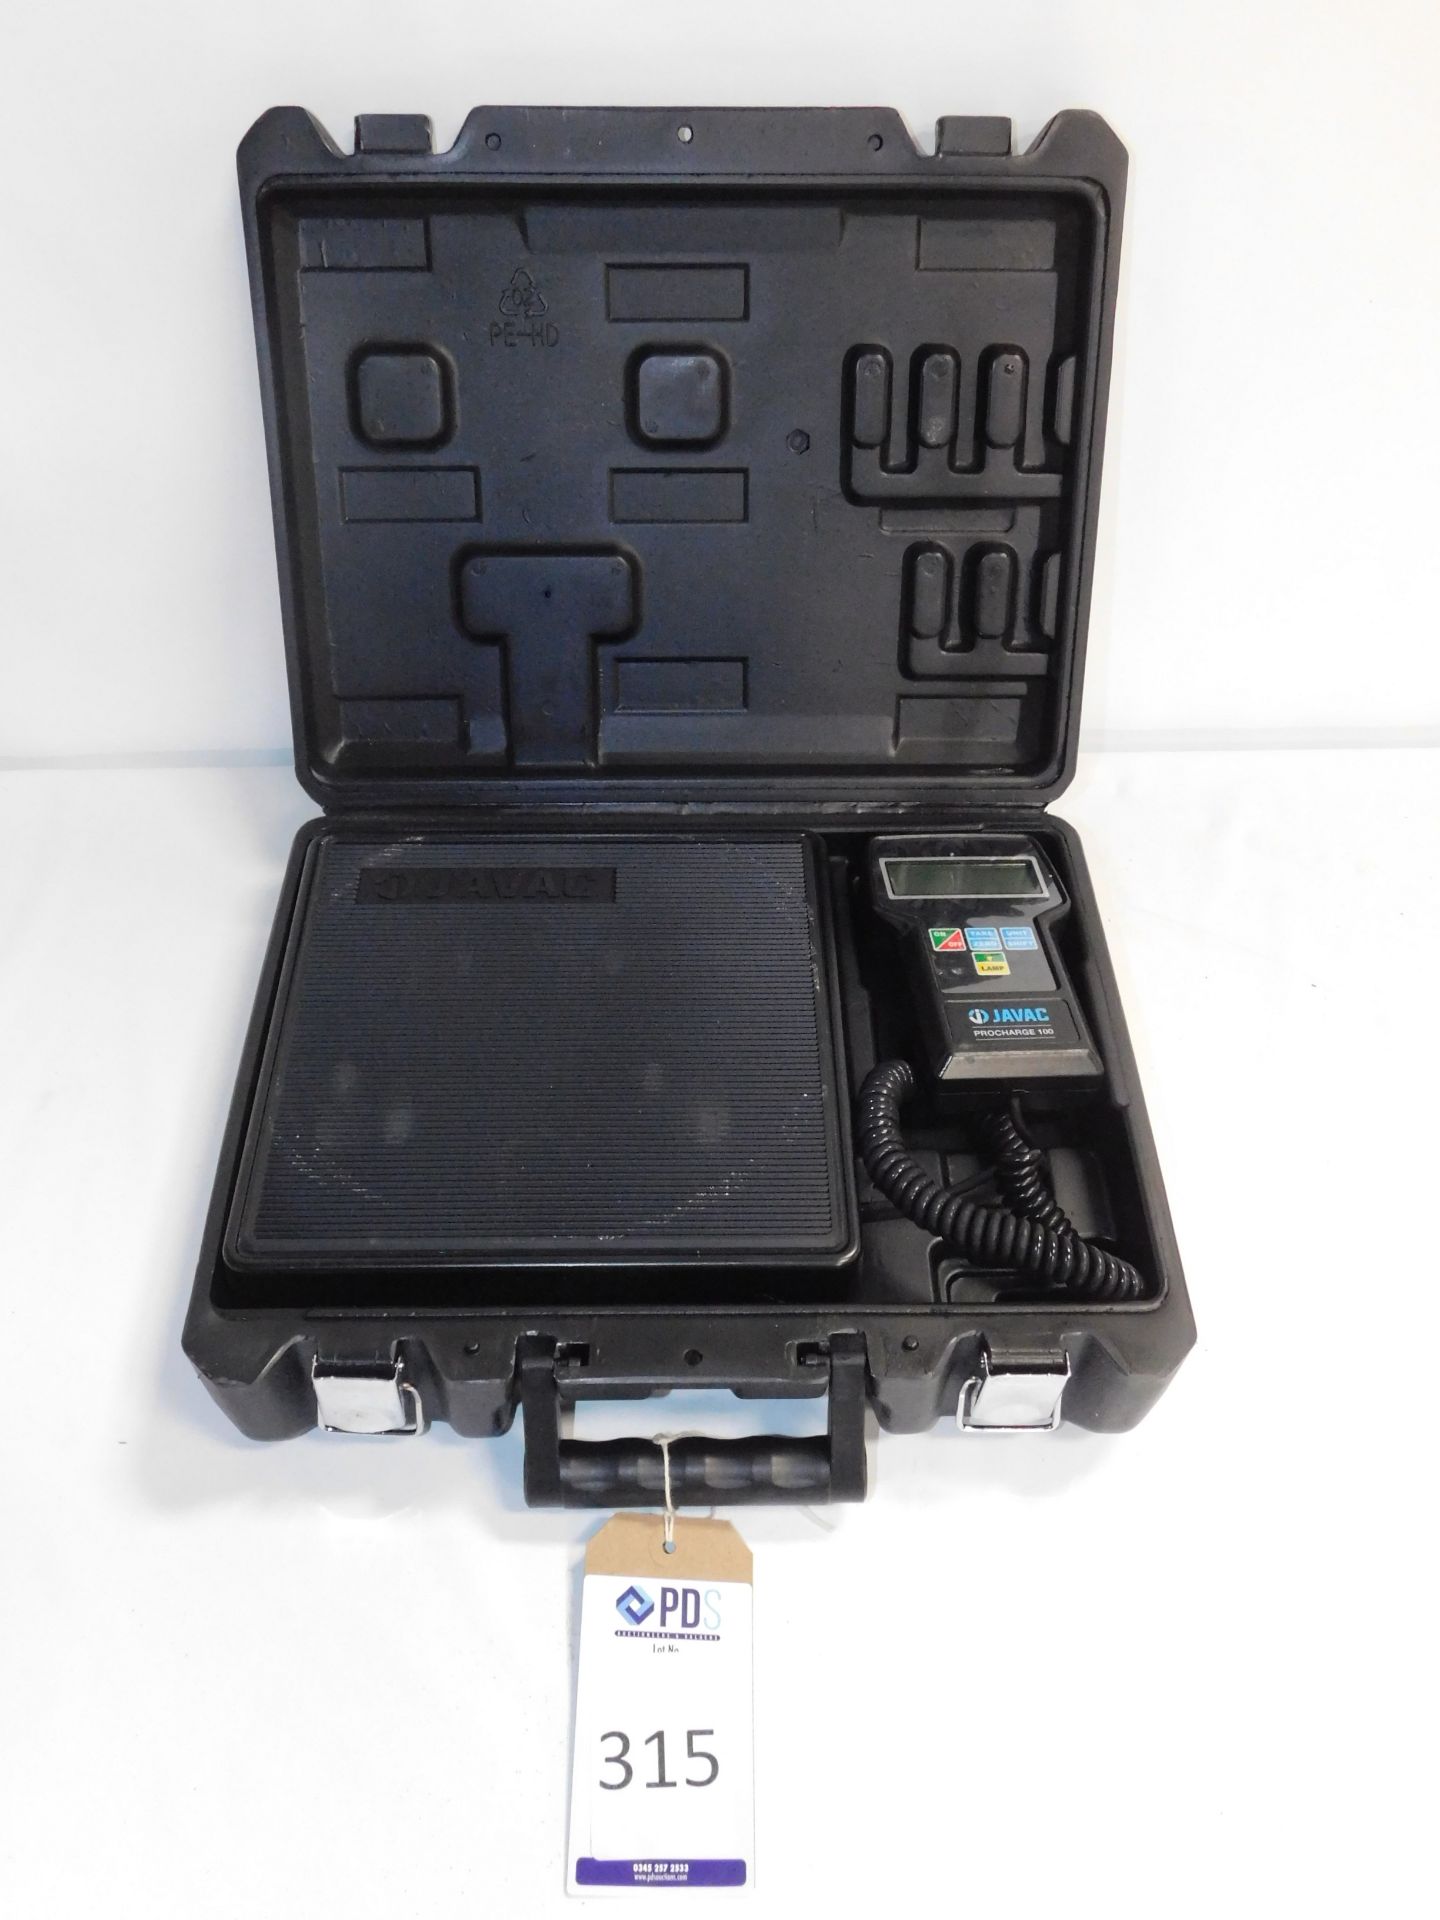 JAVAC Procharge G58610 100 Charging Scales (Location Brentwood. Please Refer to General Notes)